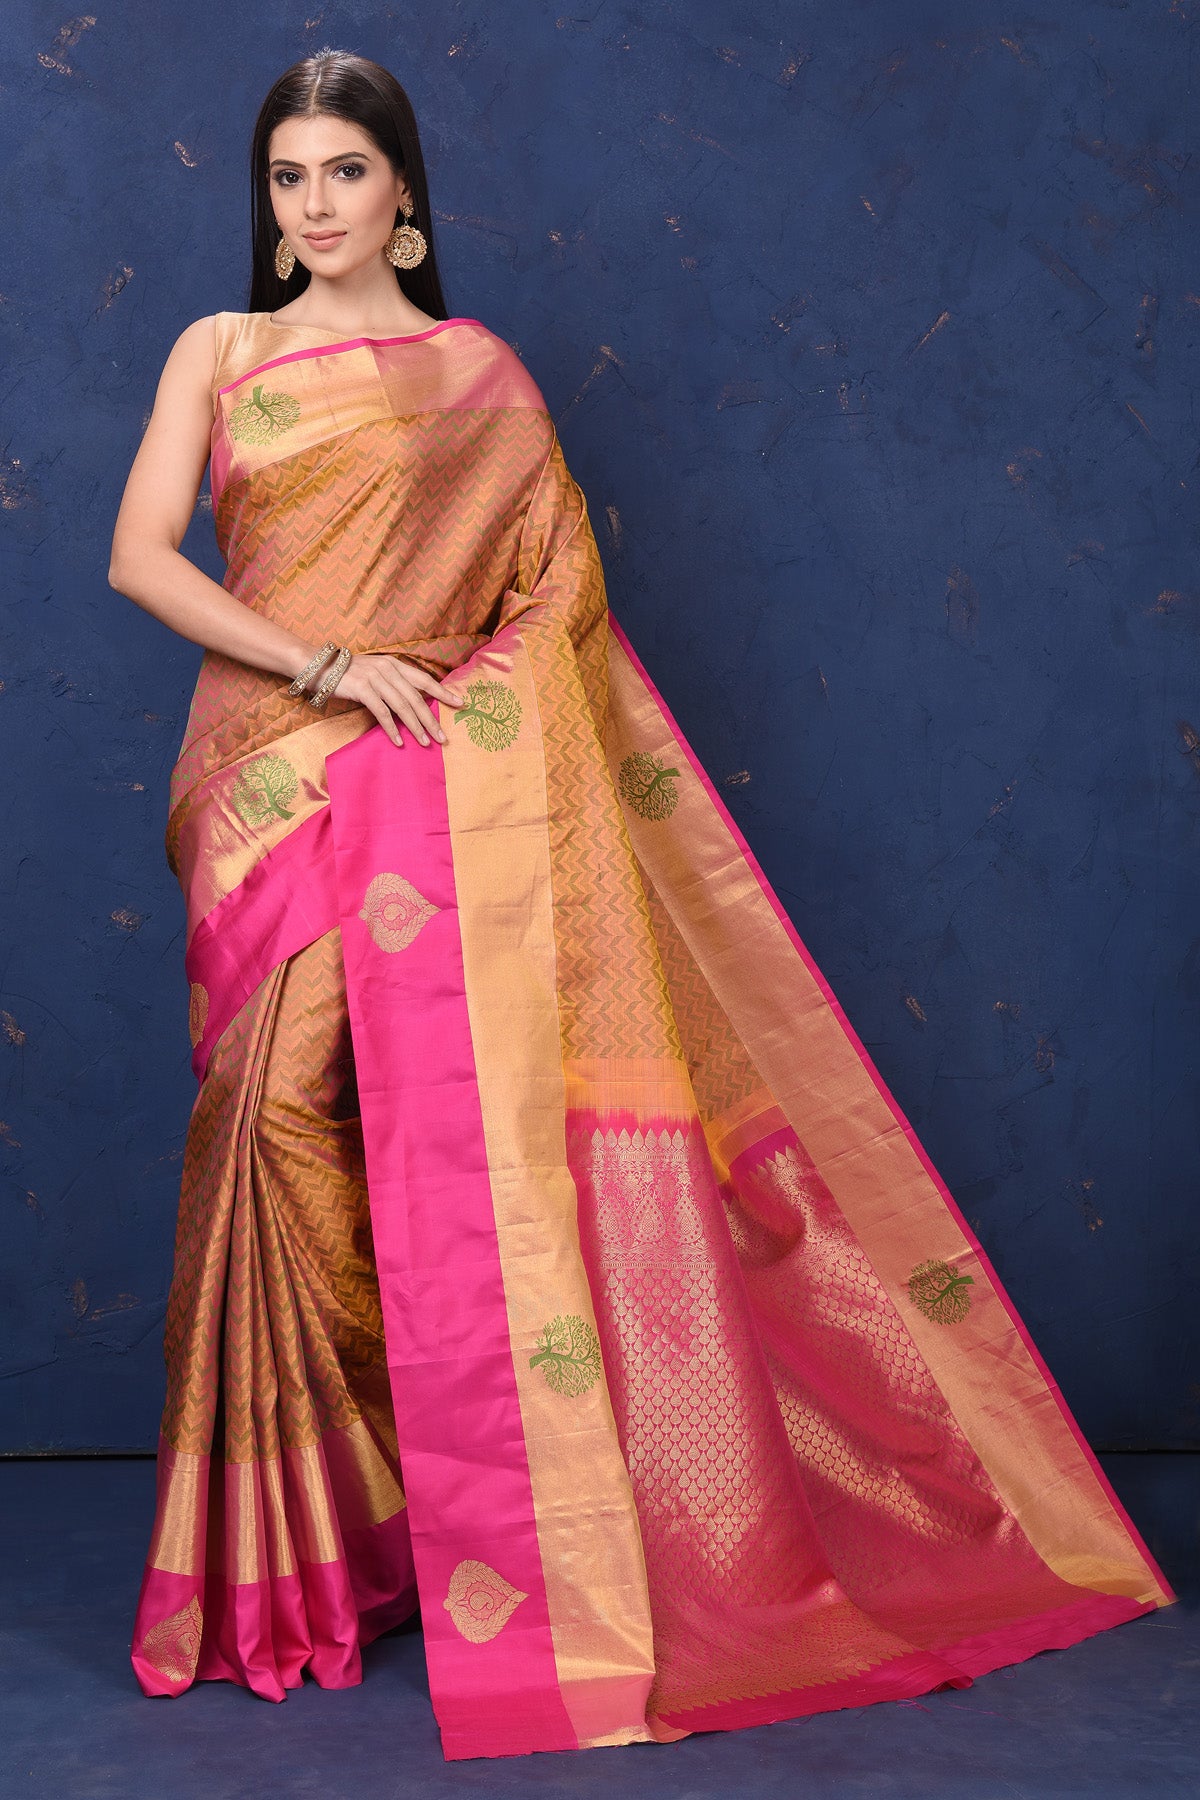 Buy beautiful mustard Kanjivaram silk sari online in USA with pink zari border. Flaunt your ethnic style at weddings and festive occasions in exquisite Indian sarees, Kanjeevaram sarees, handloom sarees, designer sarees, embroidered sarees from Pure Elegance Indian saree store in USA.-full view